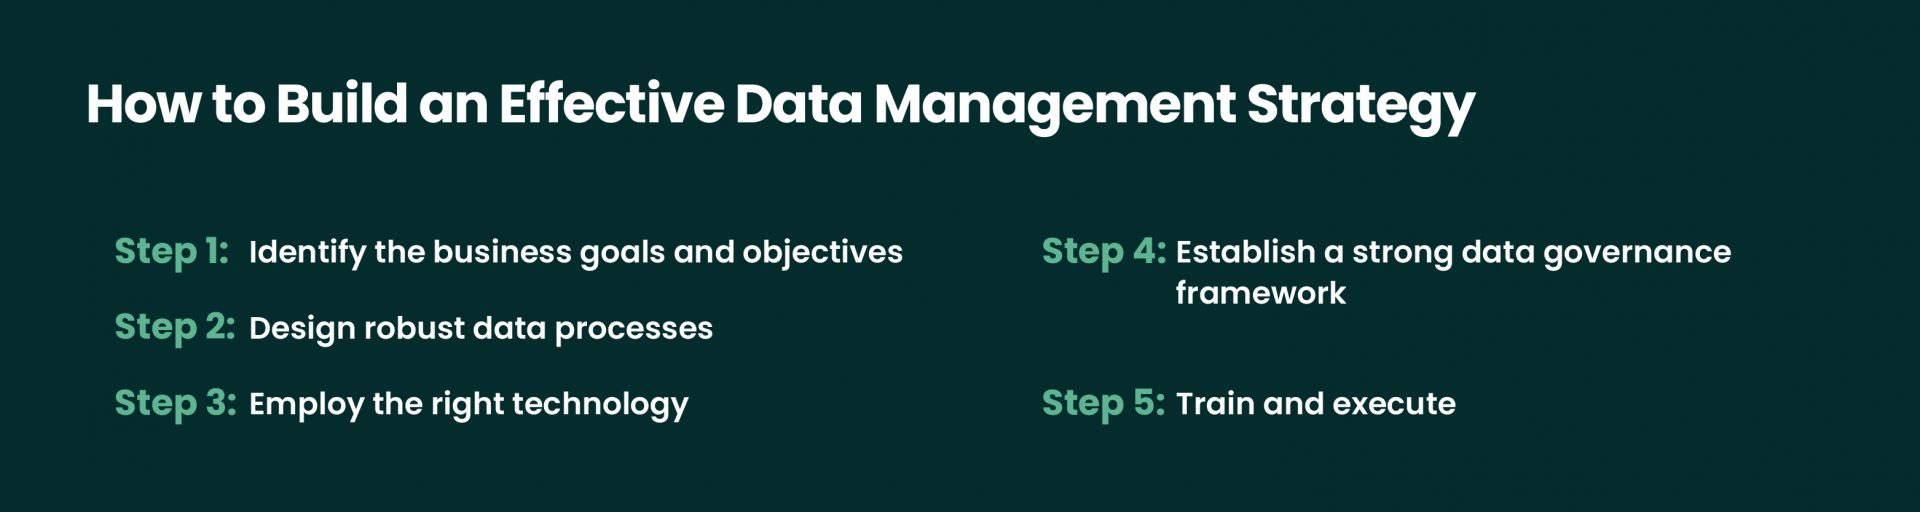 How to Build an Effective Data Management Strategy